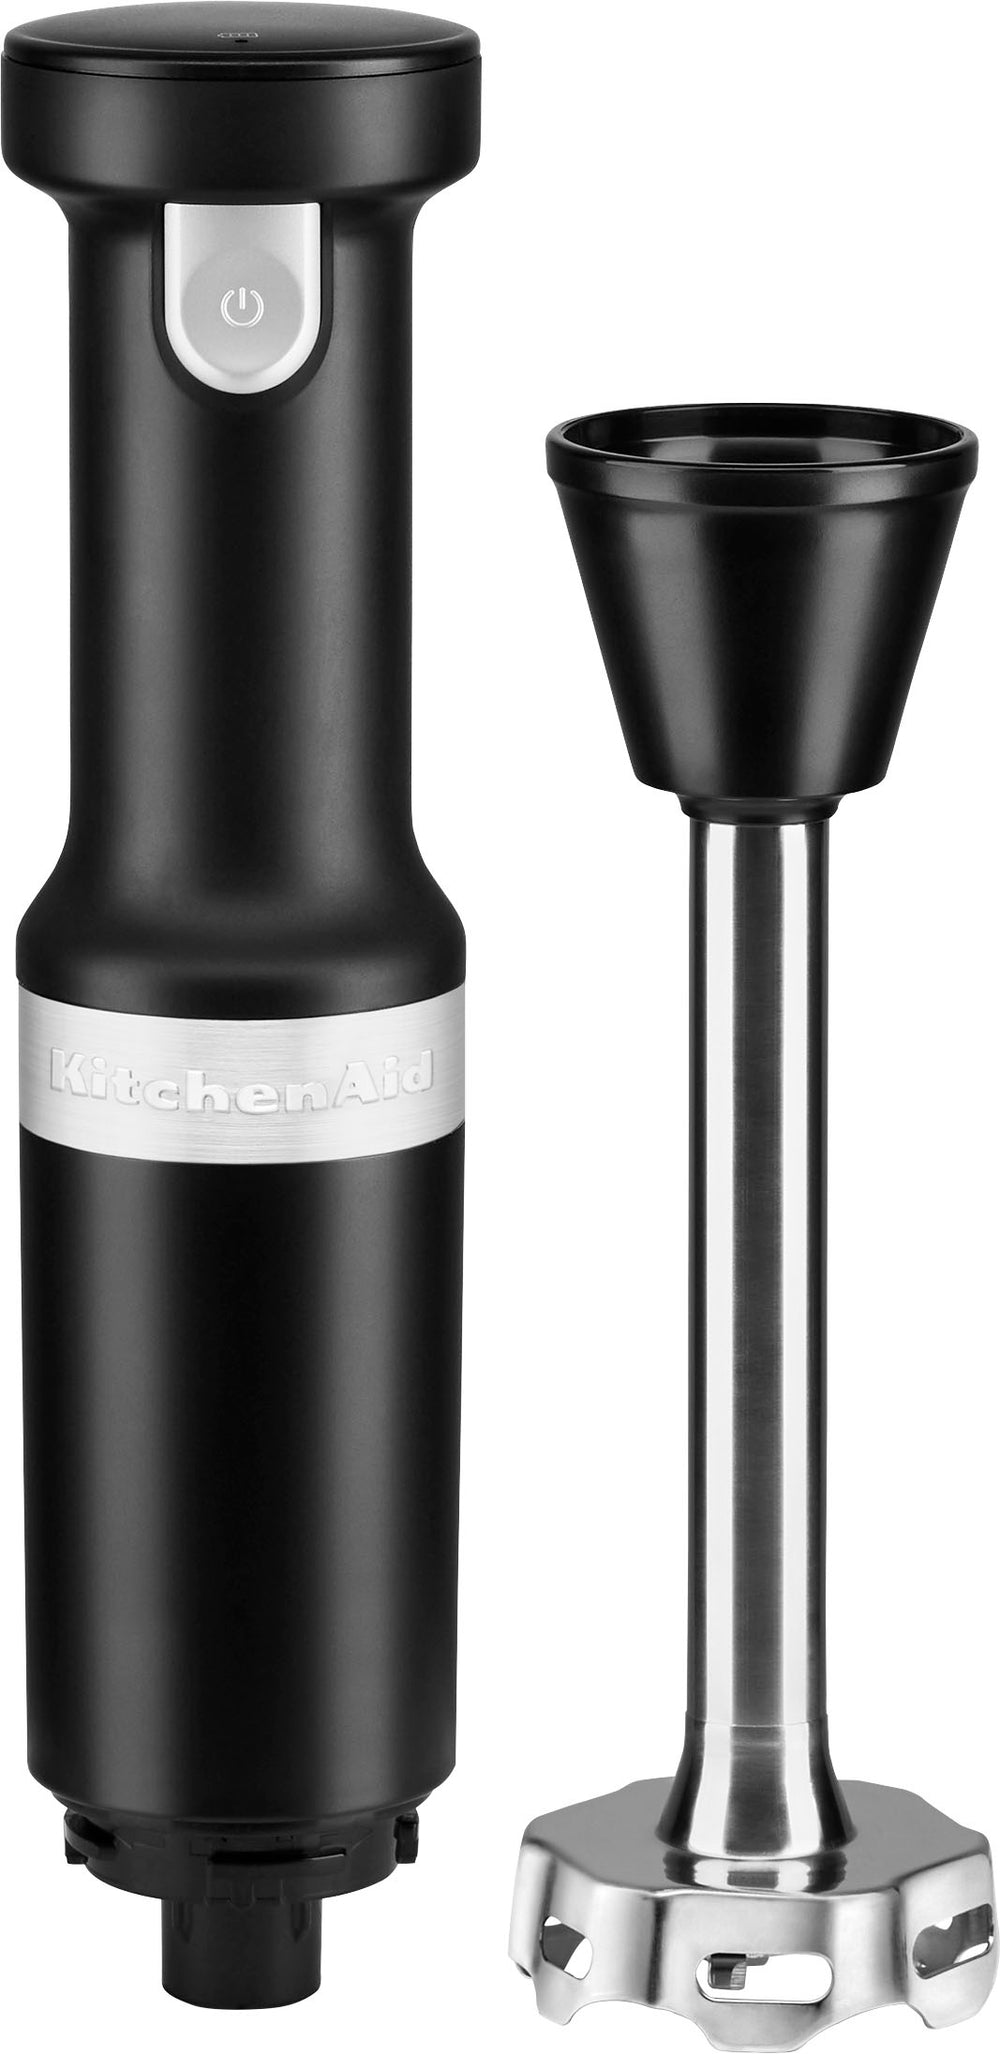 KitchenAid Cordless Variable Speed Hand Blender with Chopper and Whisk attachment - KHBBV83 - Black Matte_1